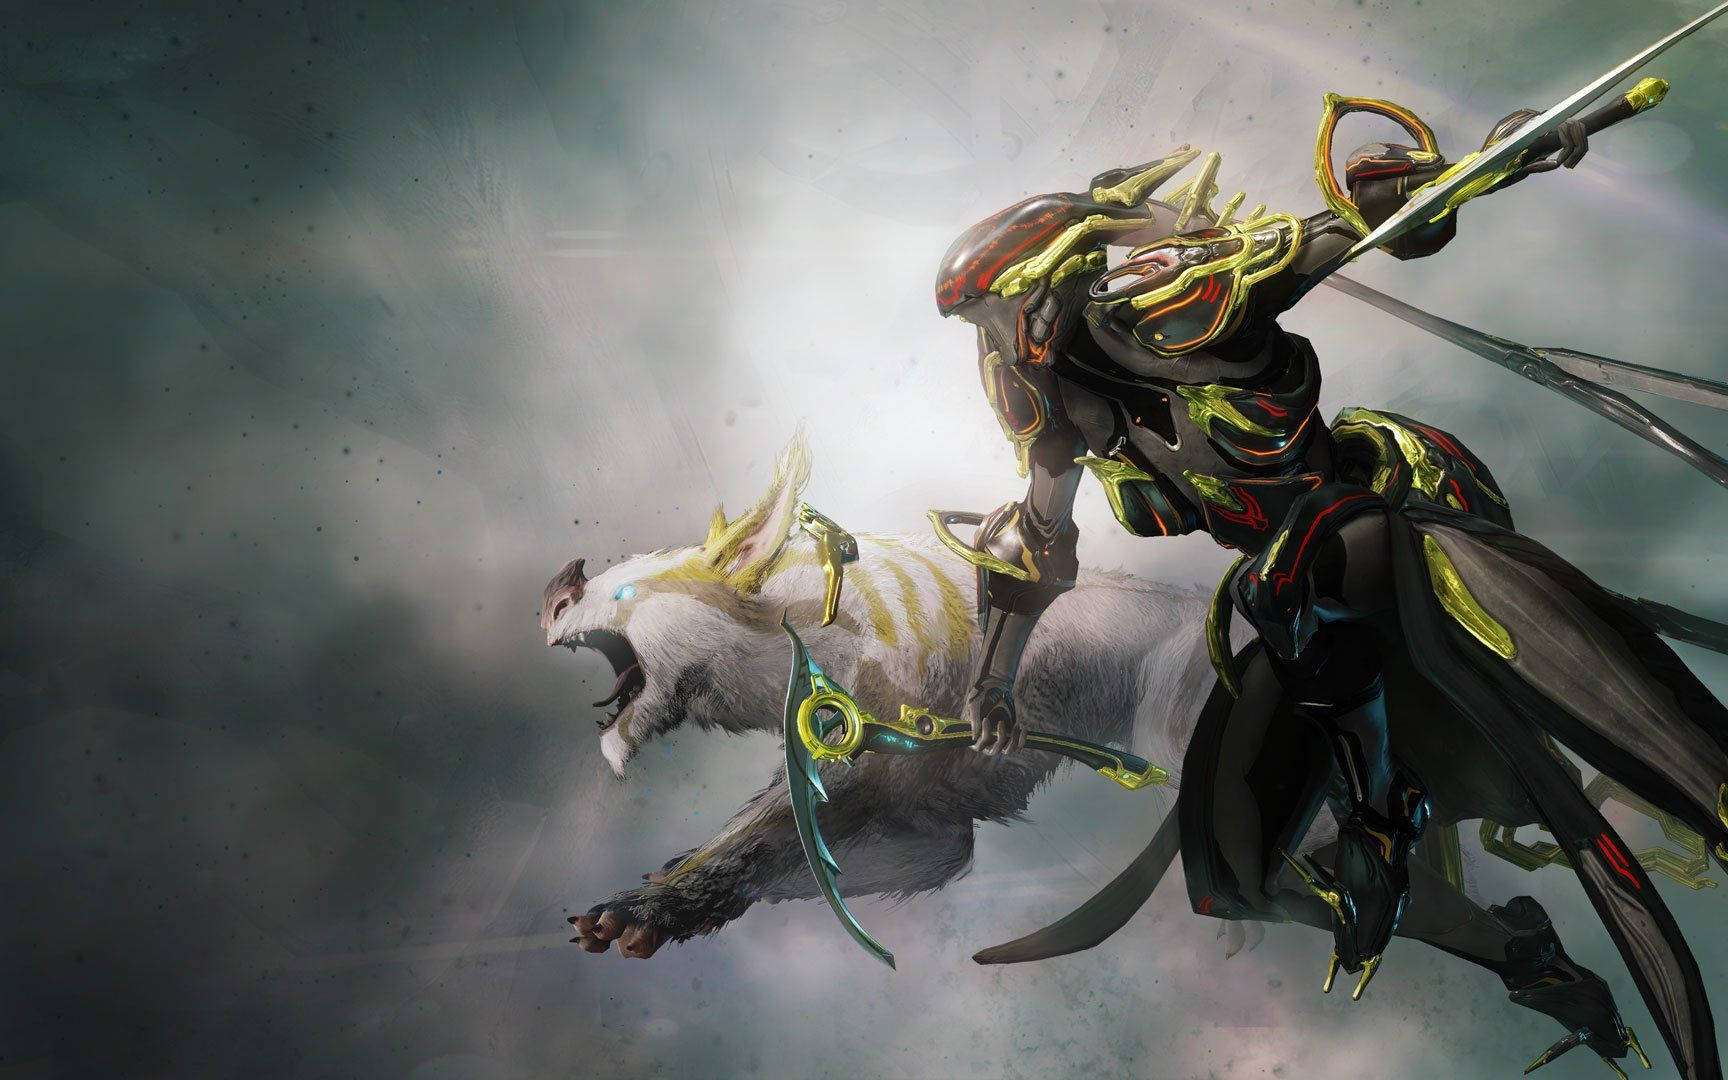 Warframe Tenno Soldier Titania bravely stands ready to defend Wallpaper